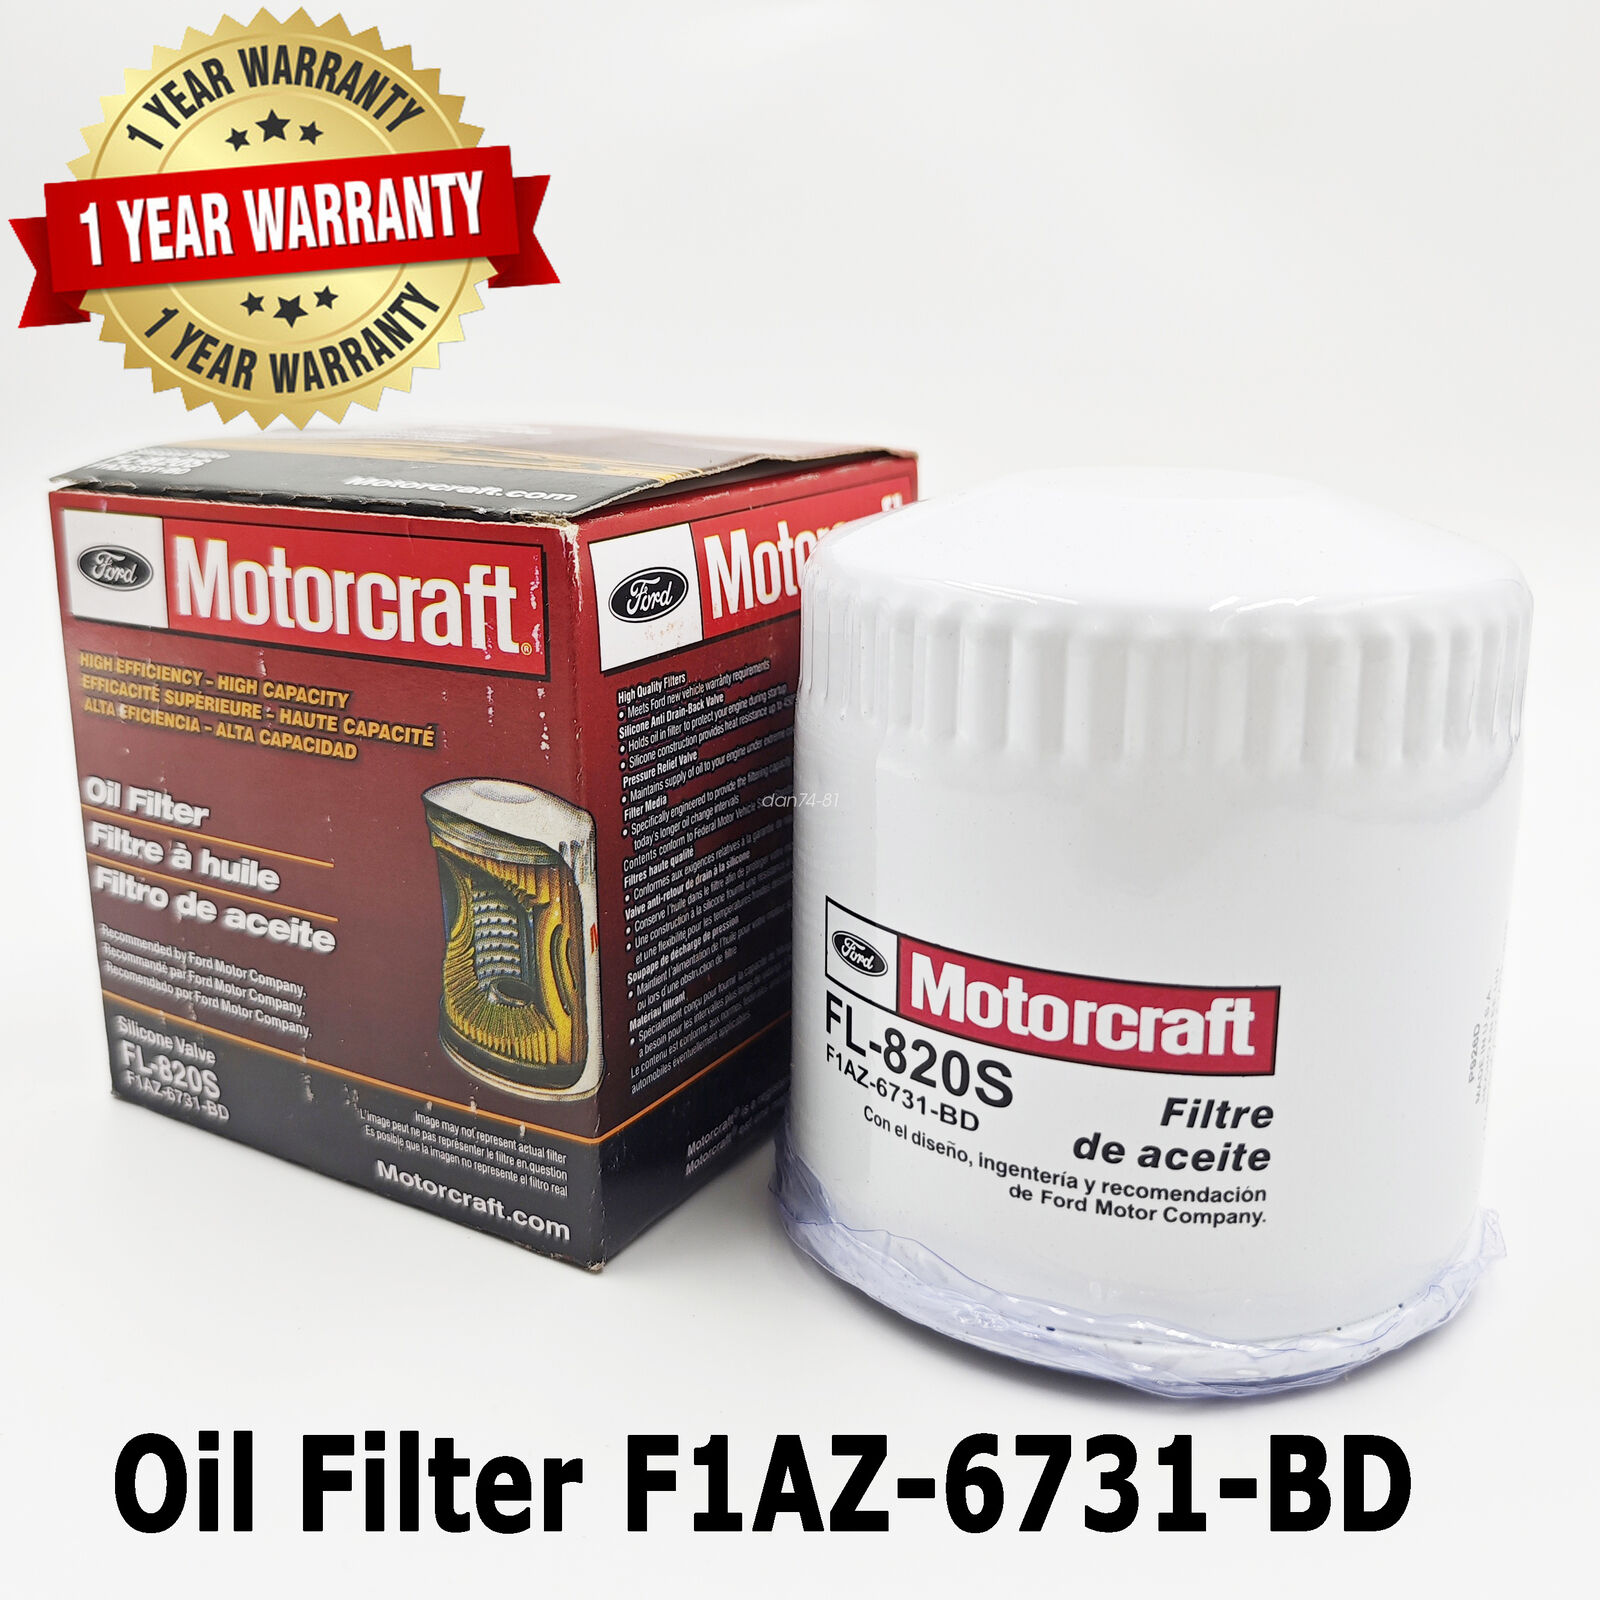 NEW Genuine Motorcraft FL820S Oil Filter F1AZ-6731-BD FREE SHIPPING, MADE IN USA